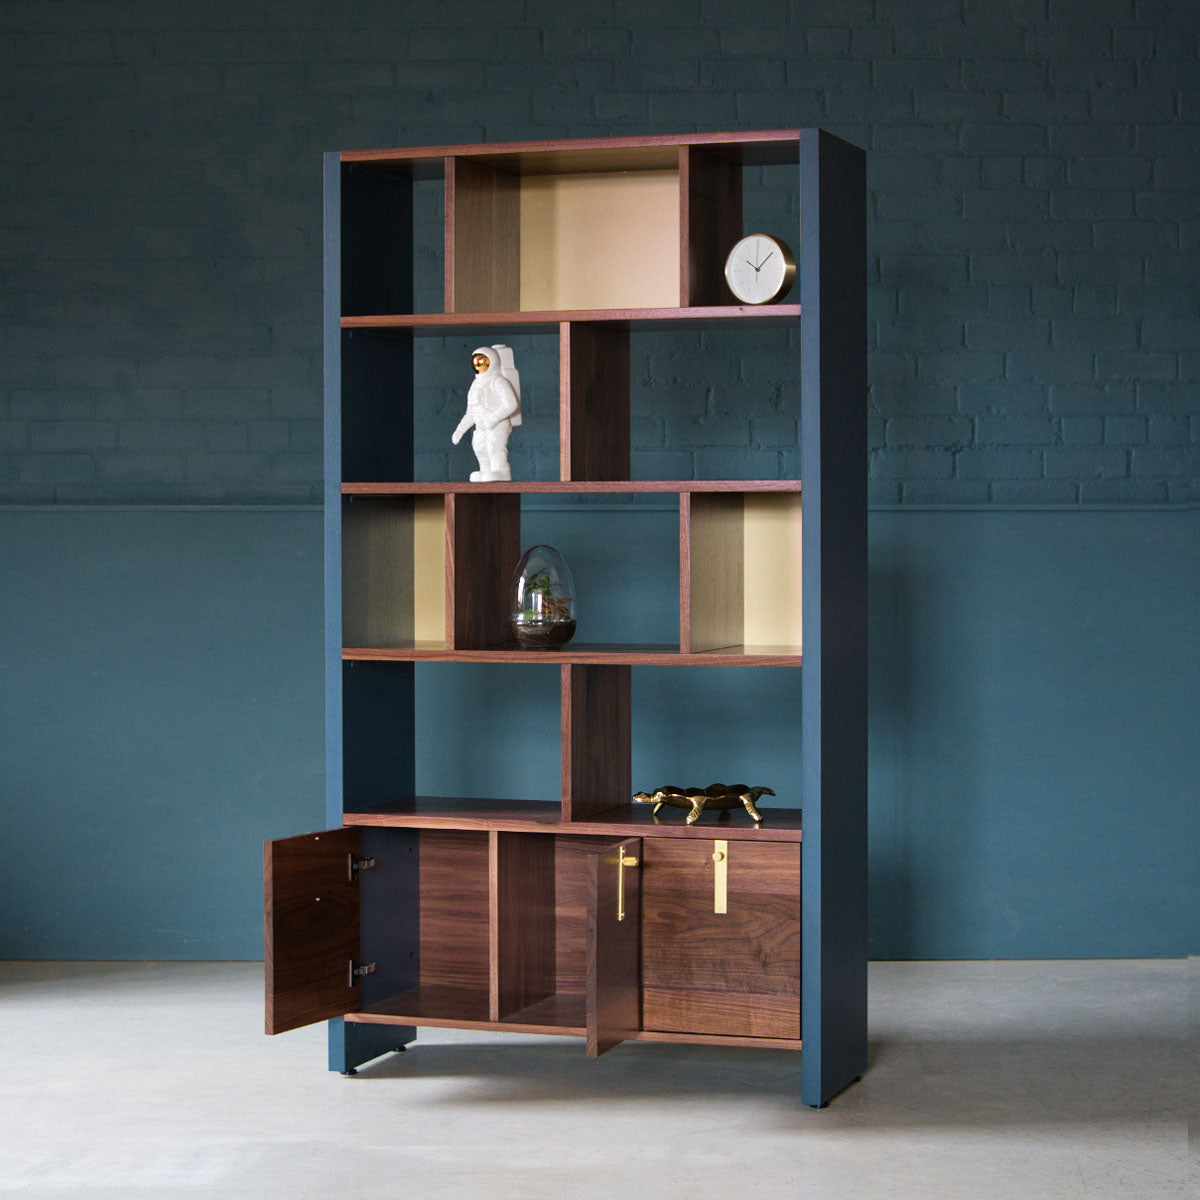 An image of the Walnut Bookcase, Aeris product available from Koda Studios